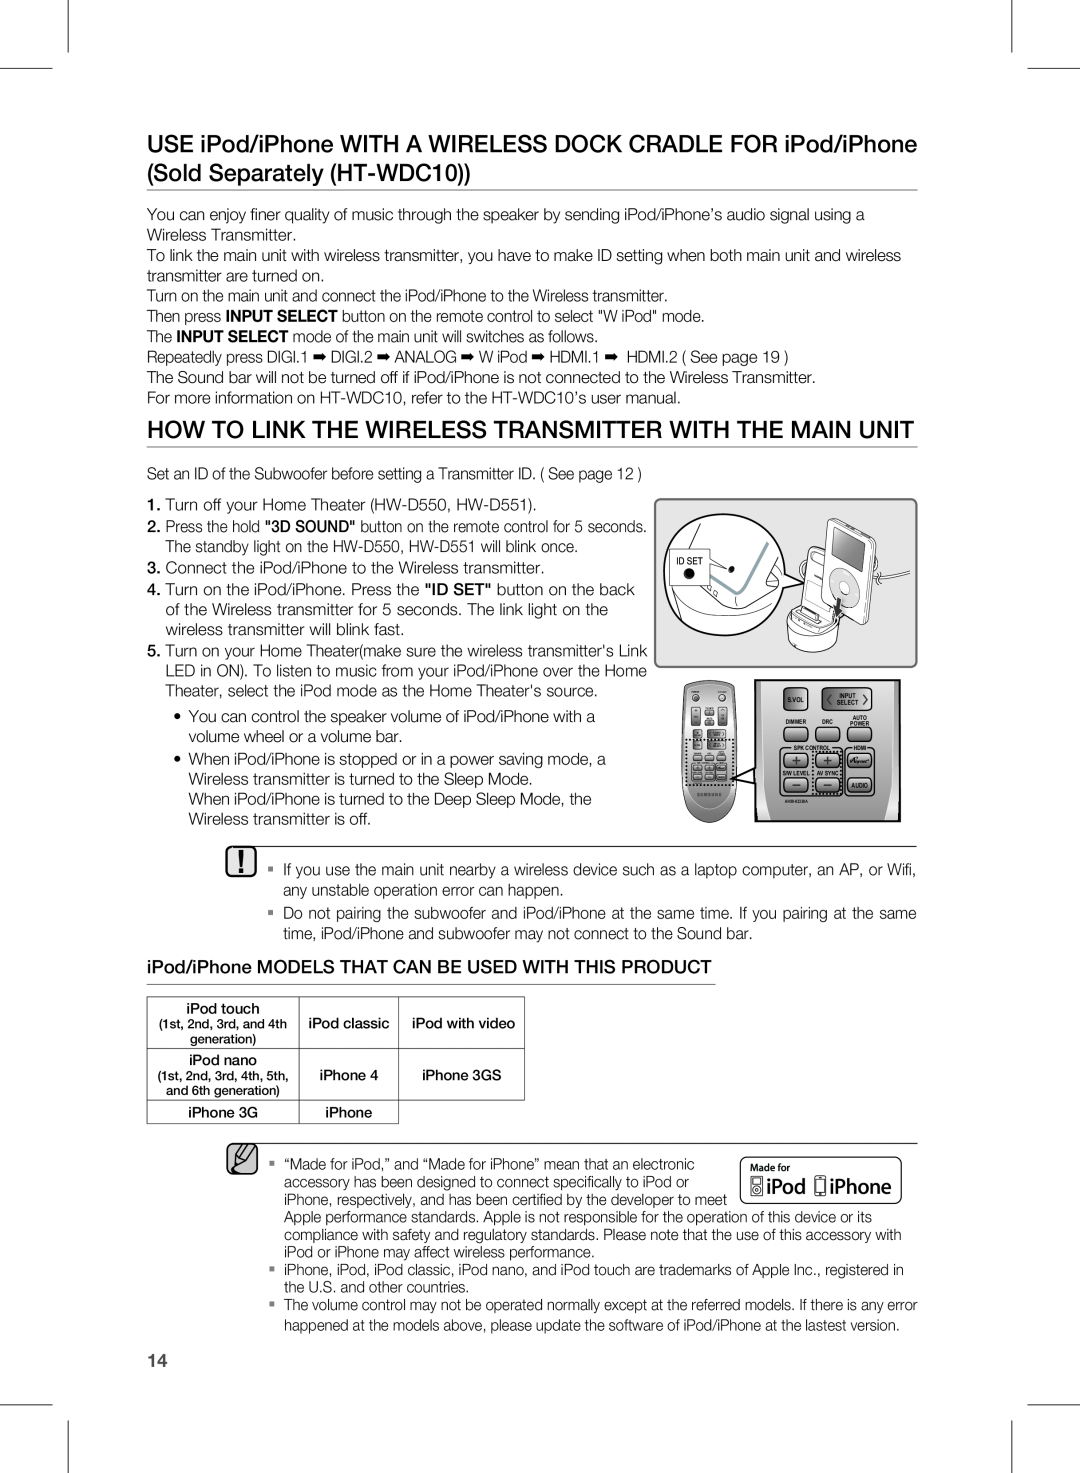 Samsung user manual Turn off your Home Theater HW-D550, HW-D551 